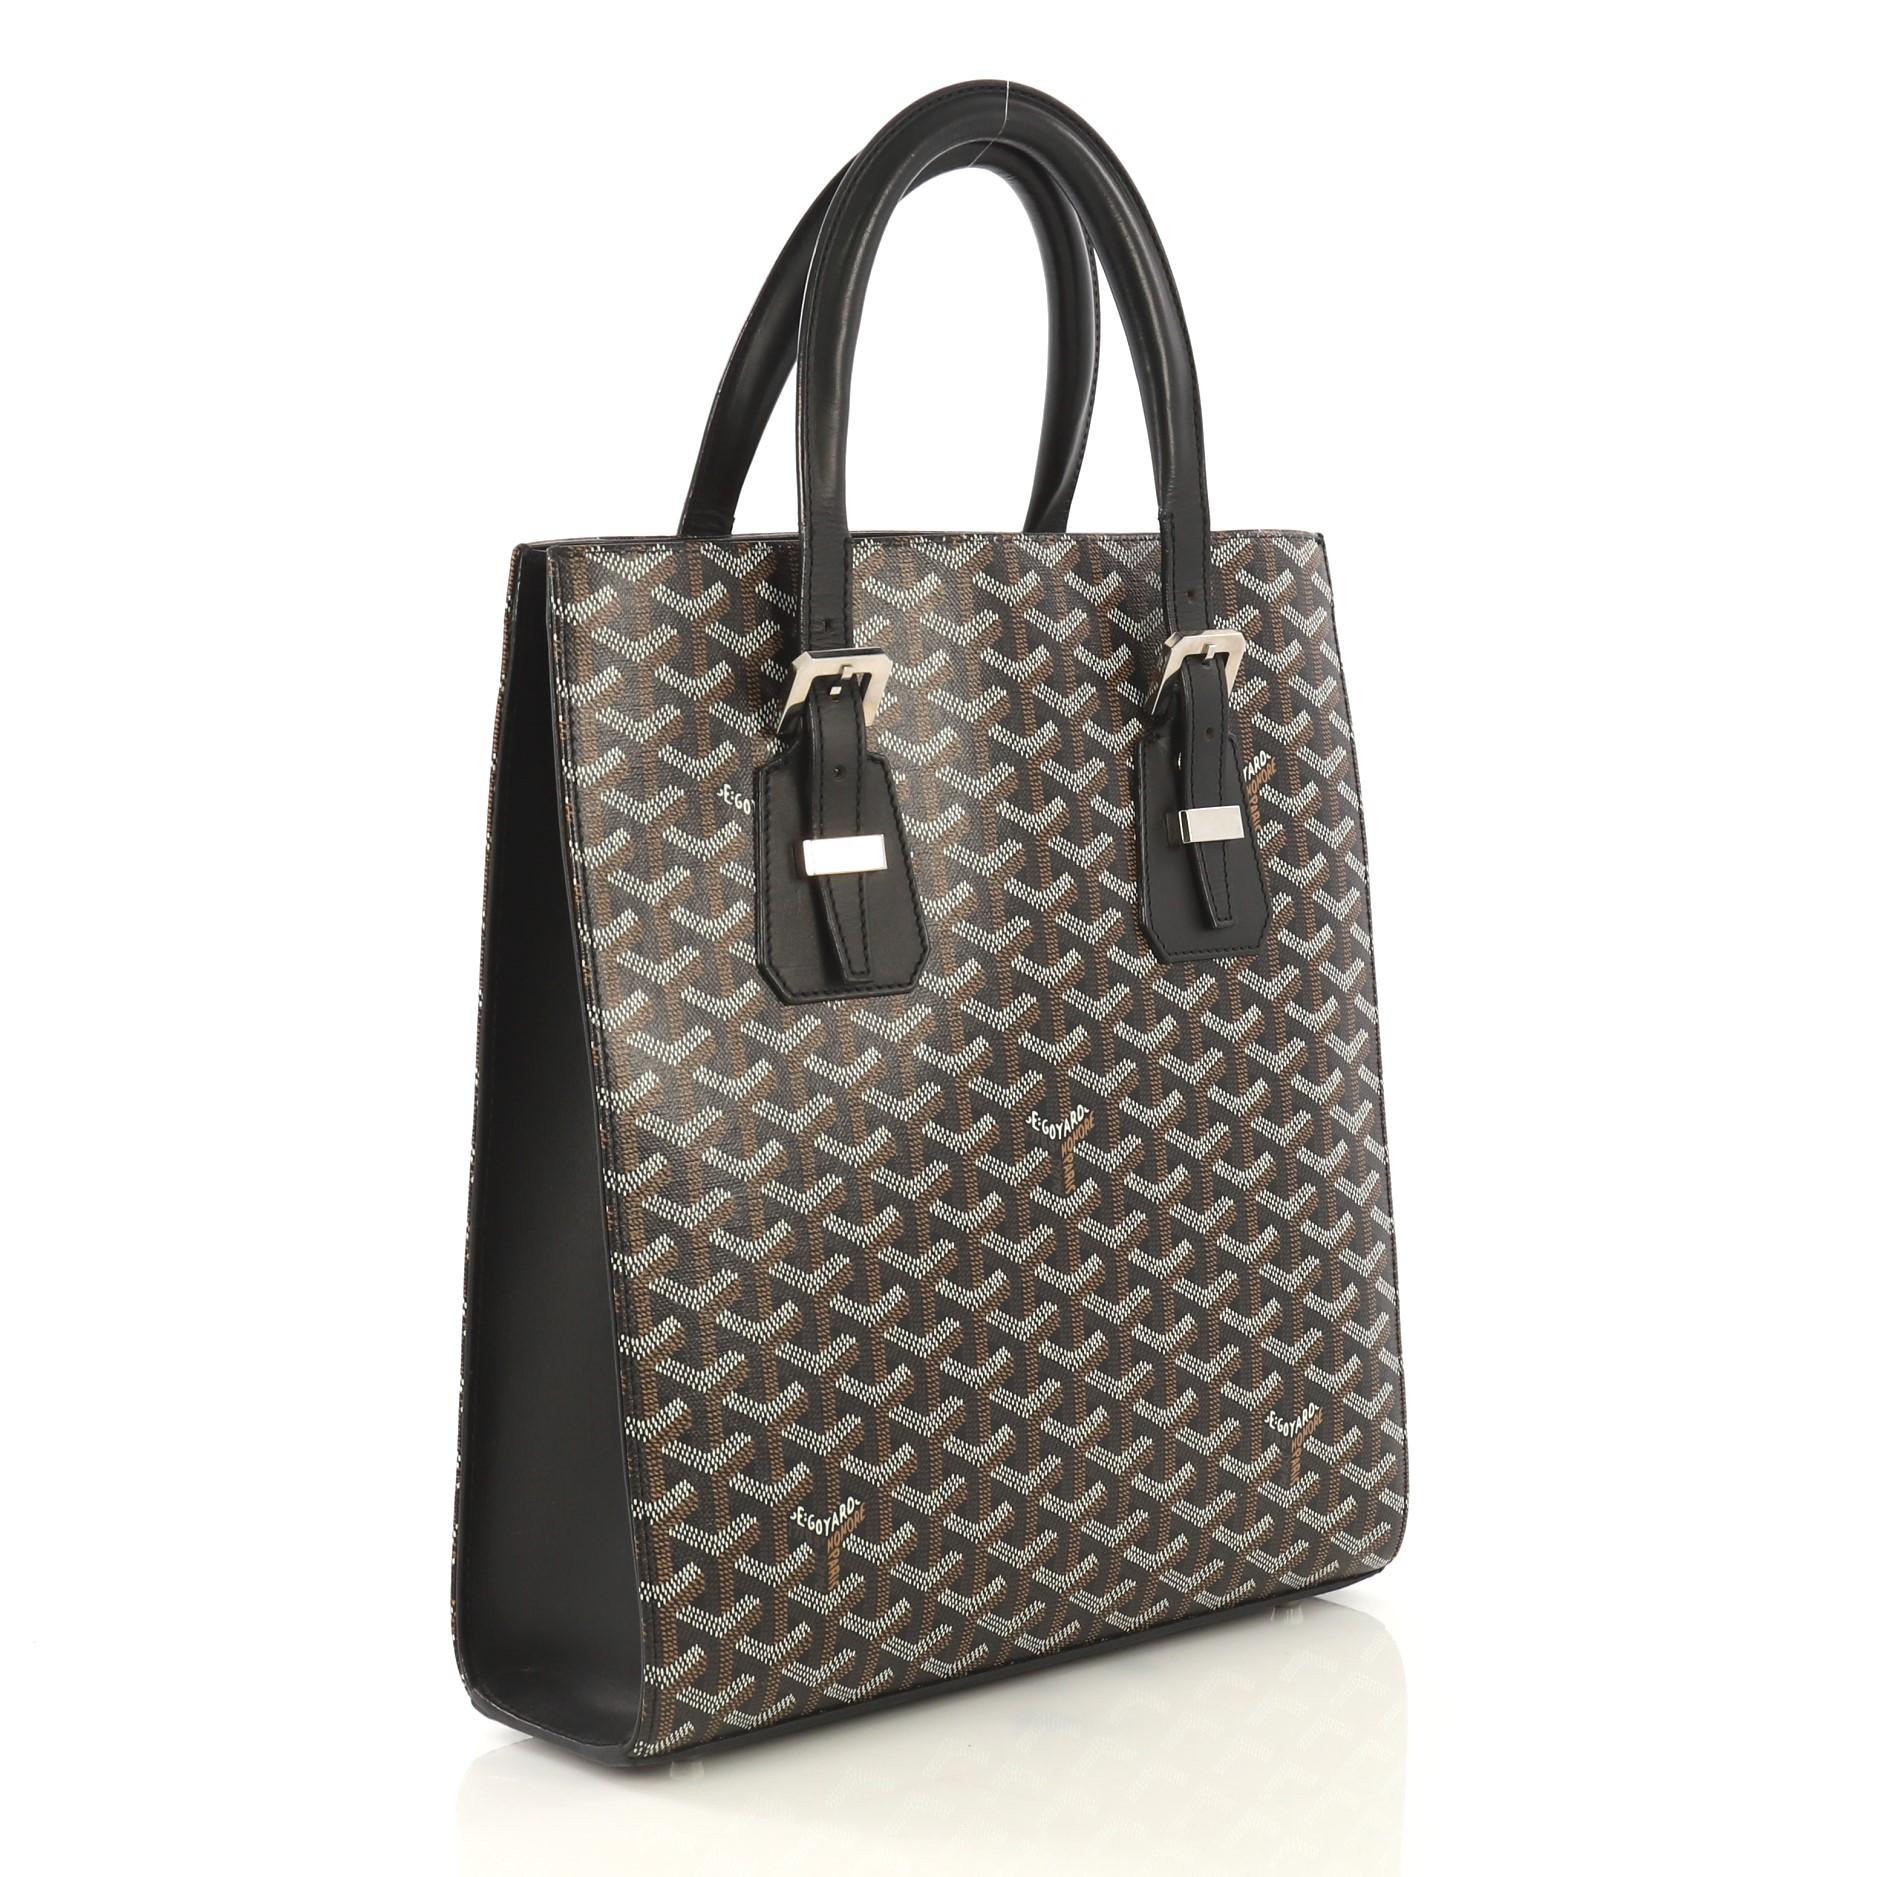 This Goyard Comores Tote Coated Canvas PM, crafted from black coated canvas and leather, features dual leather handles with buckle detailing, leather trim, and silver-tone hardware. It opens to a yellow fabric interior with side zip pocket.